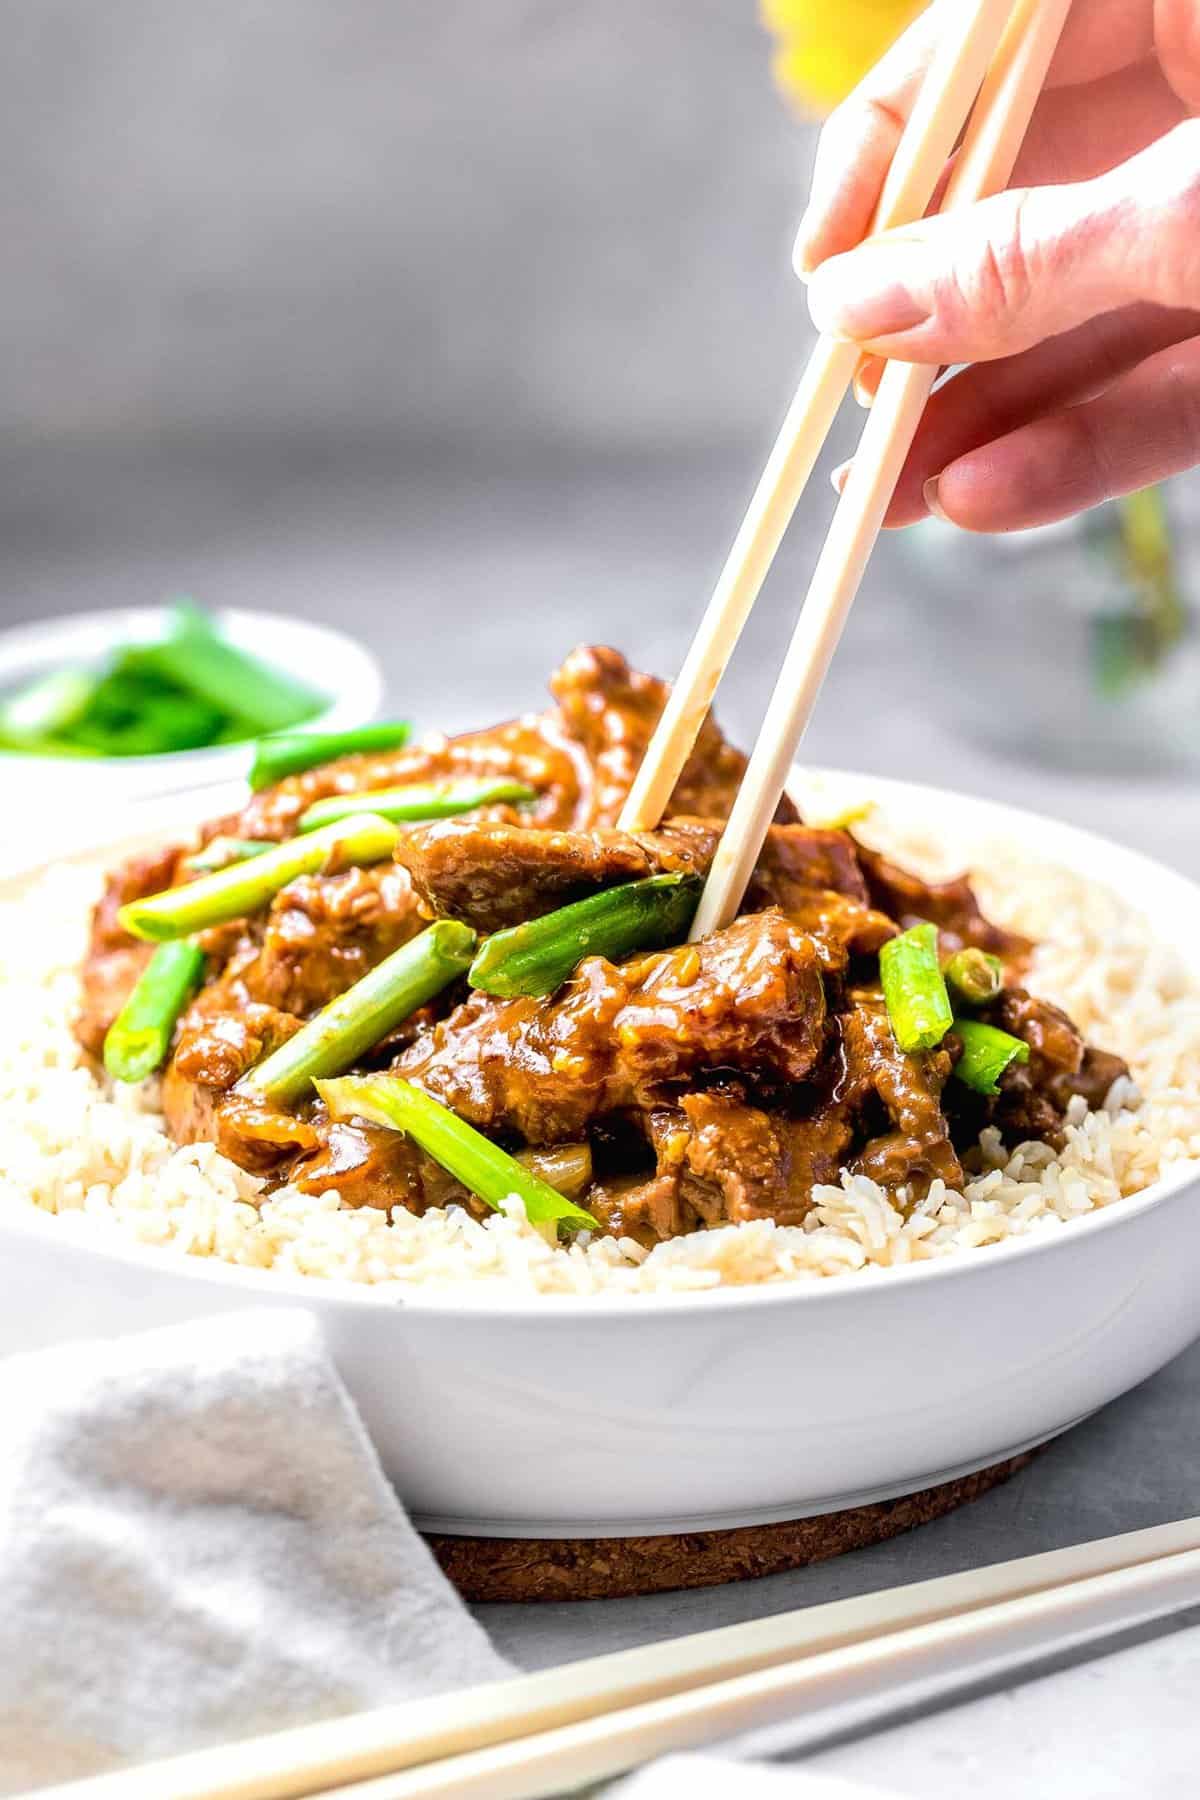 Mongolian beef served in a bowl over rice with a hand wielding chopsticks.